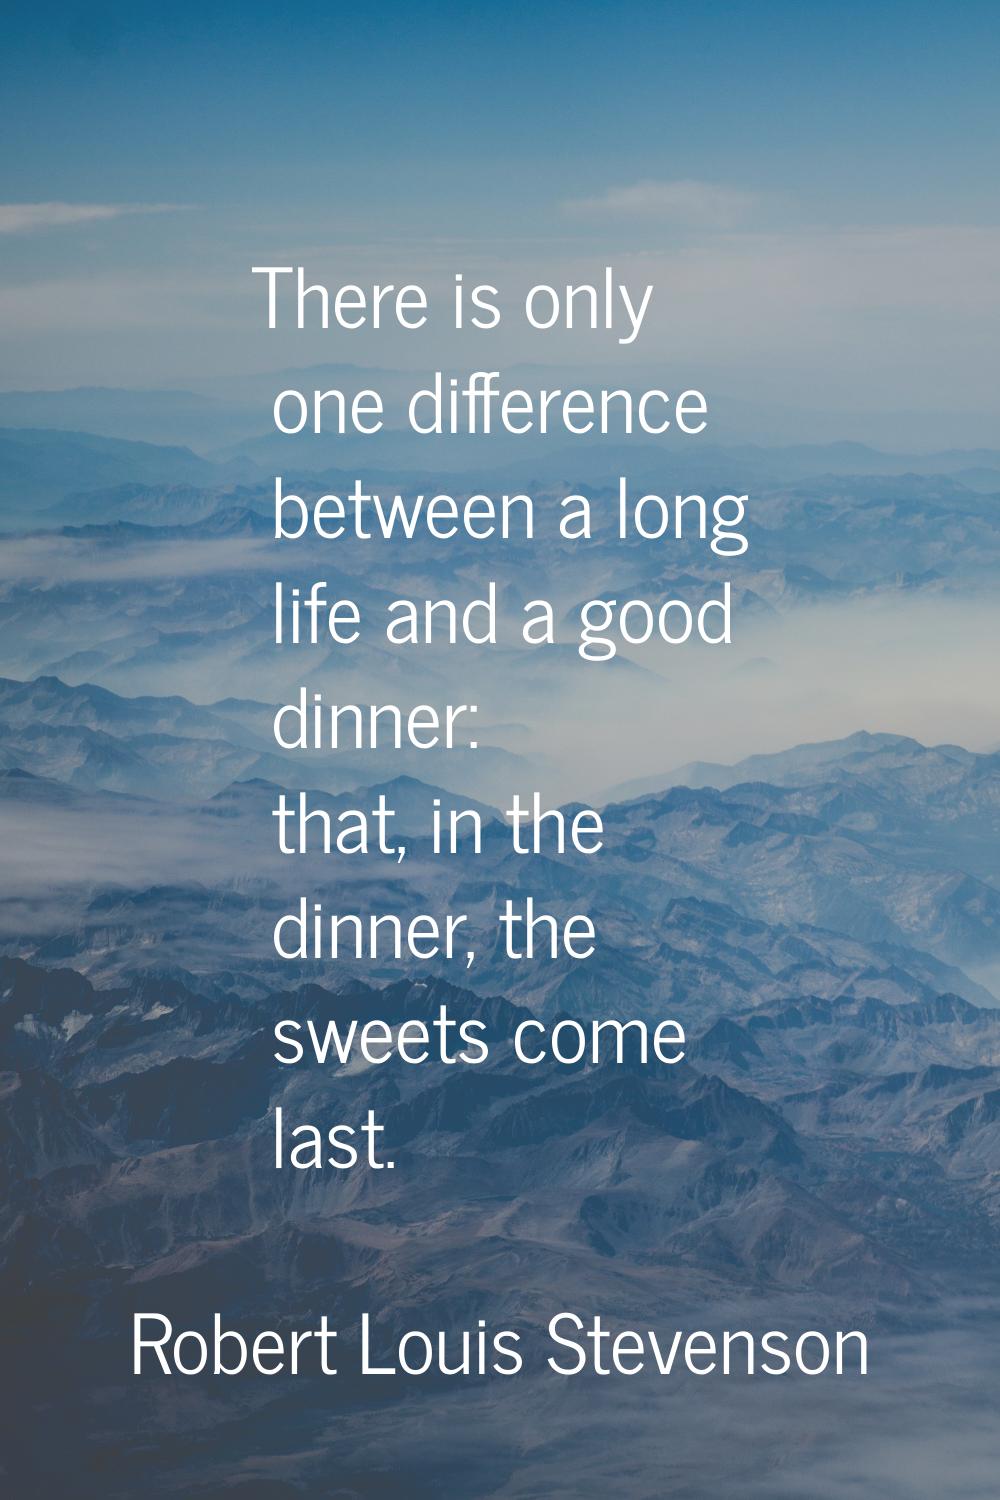 There is only one difference between a long life and a good dinner: that, in the dinner, the sweets